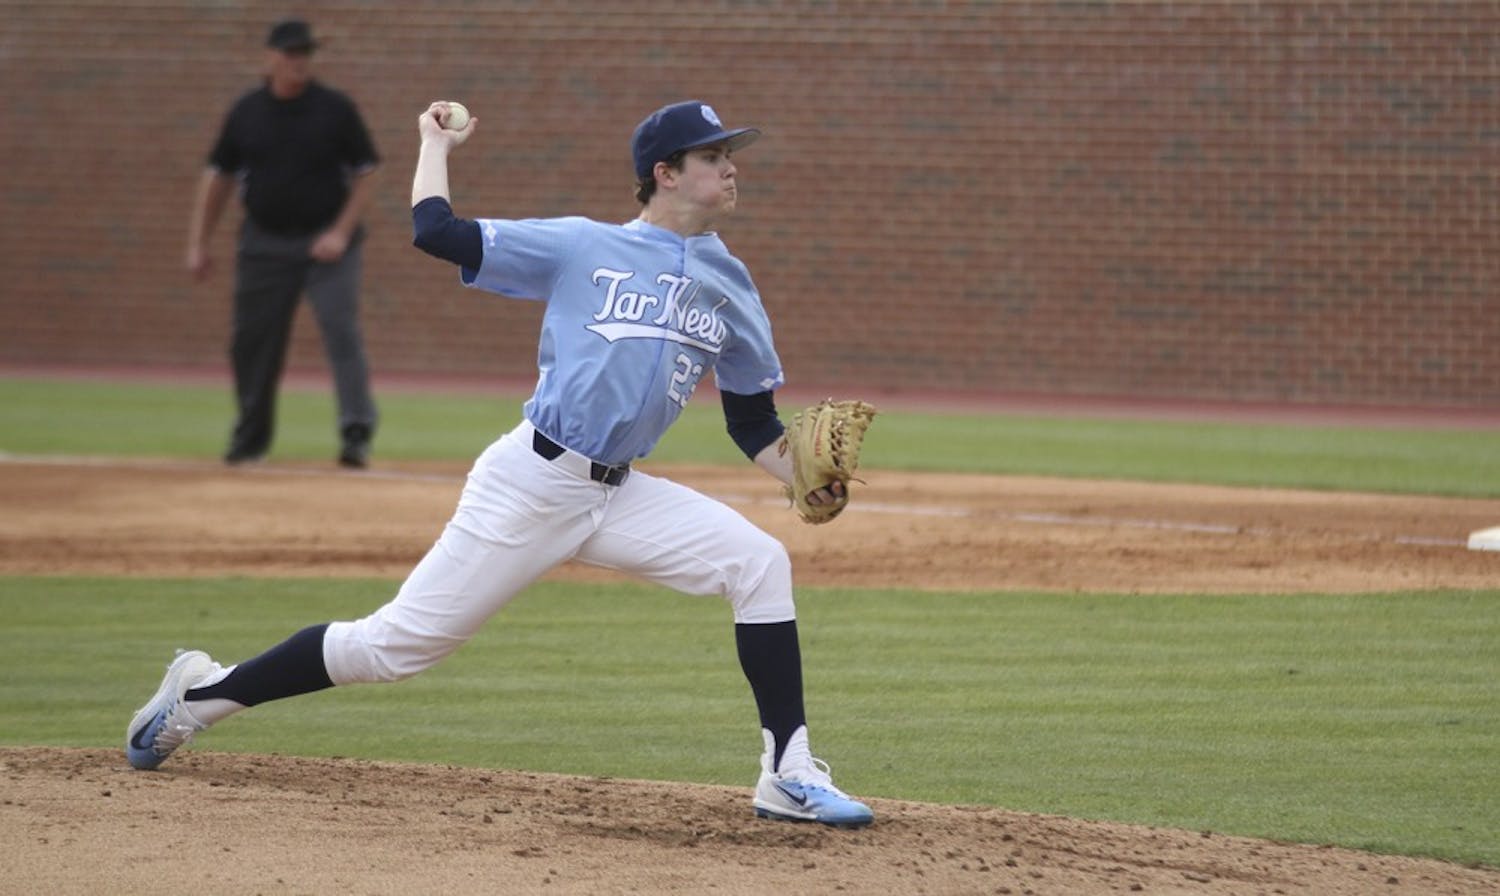 North Carolina pitcher&nbsp;Tyler Baum (23) throws a pitch against VCU on Tuesday.